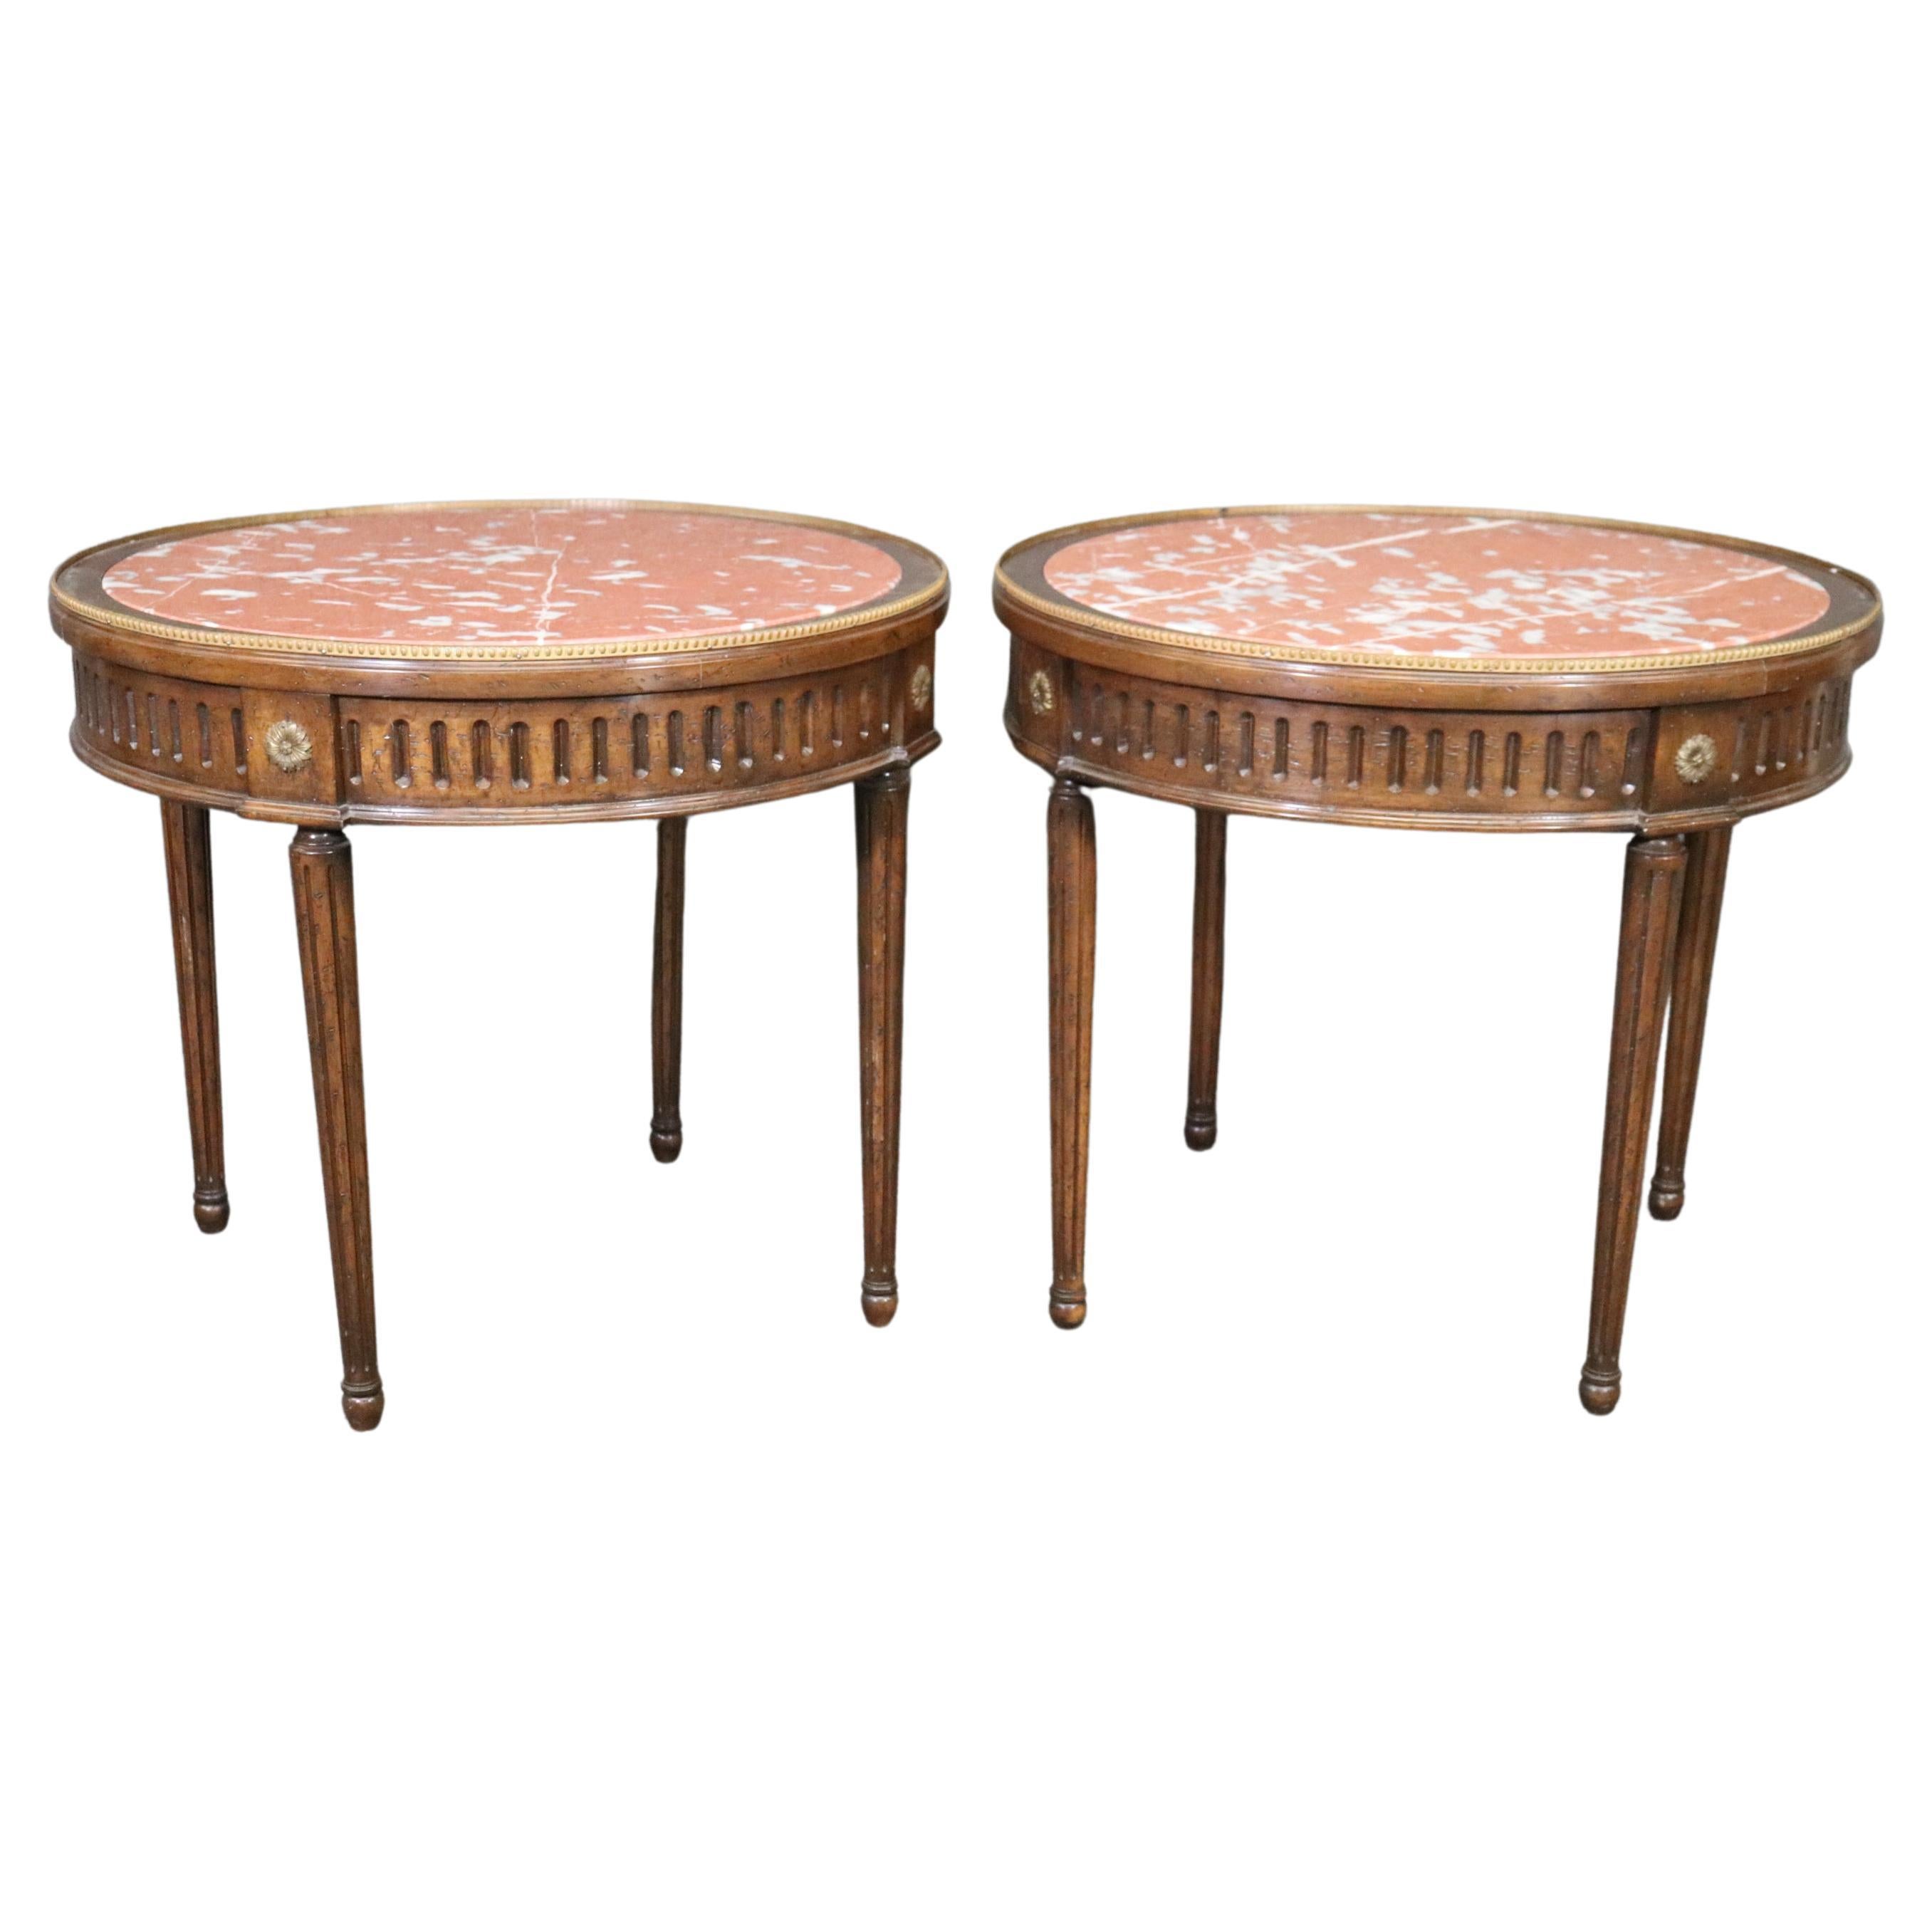 Fantastic Pair of French Marble Top Bouillotte Tables with Brass Trim circa 1940